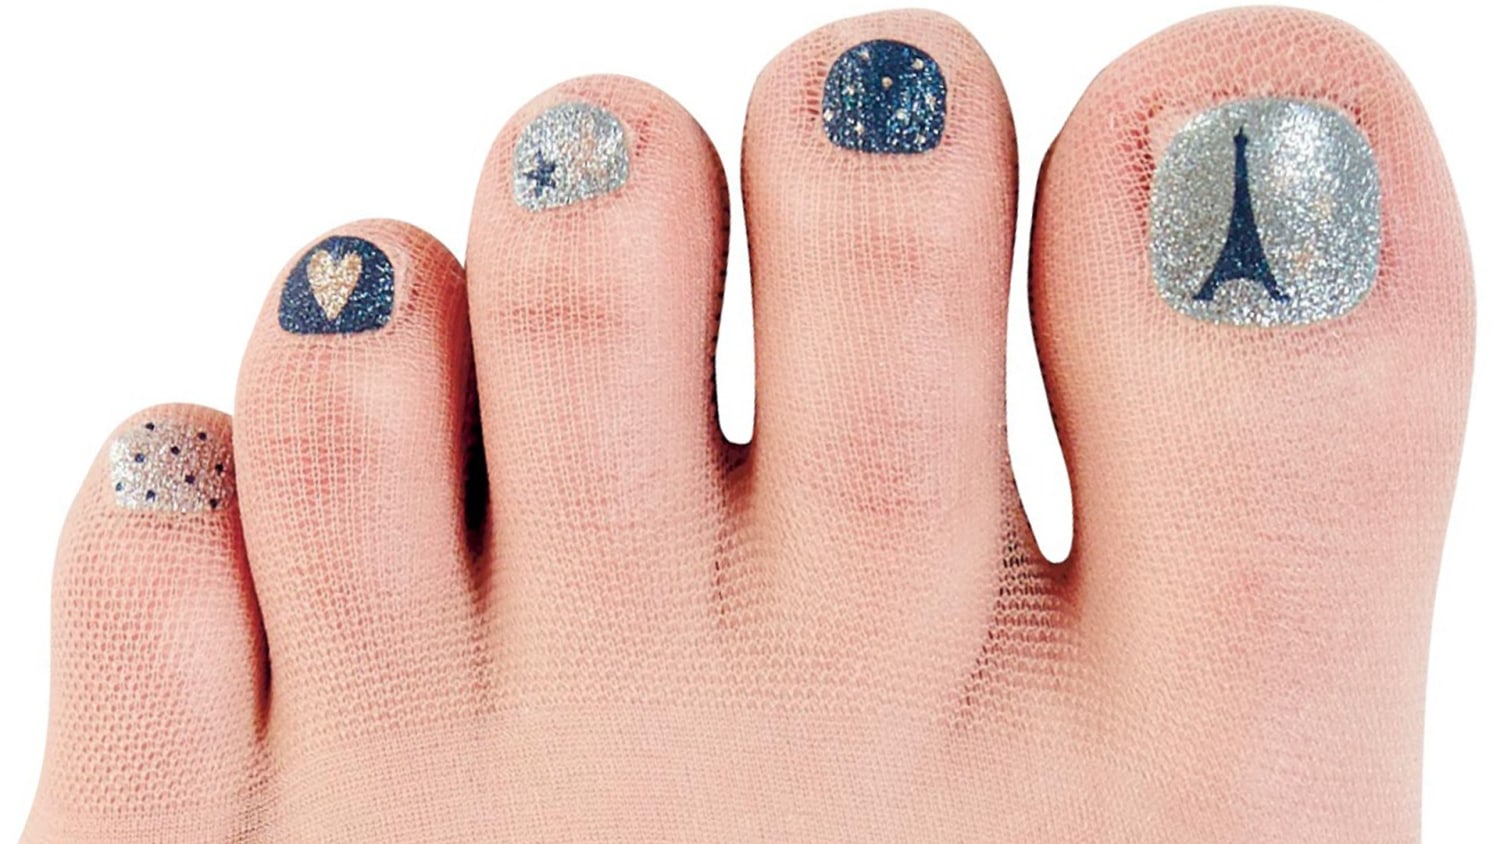 30+ Toe Nail Art Ideas for a Walk on the Wild Side of Style